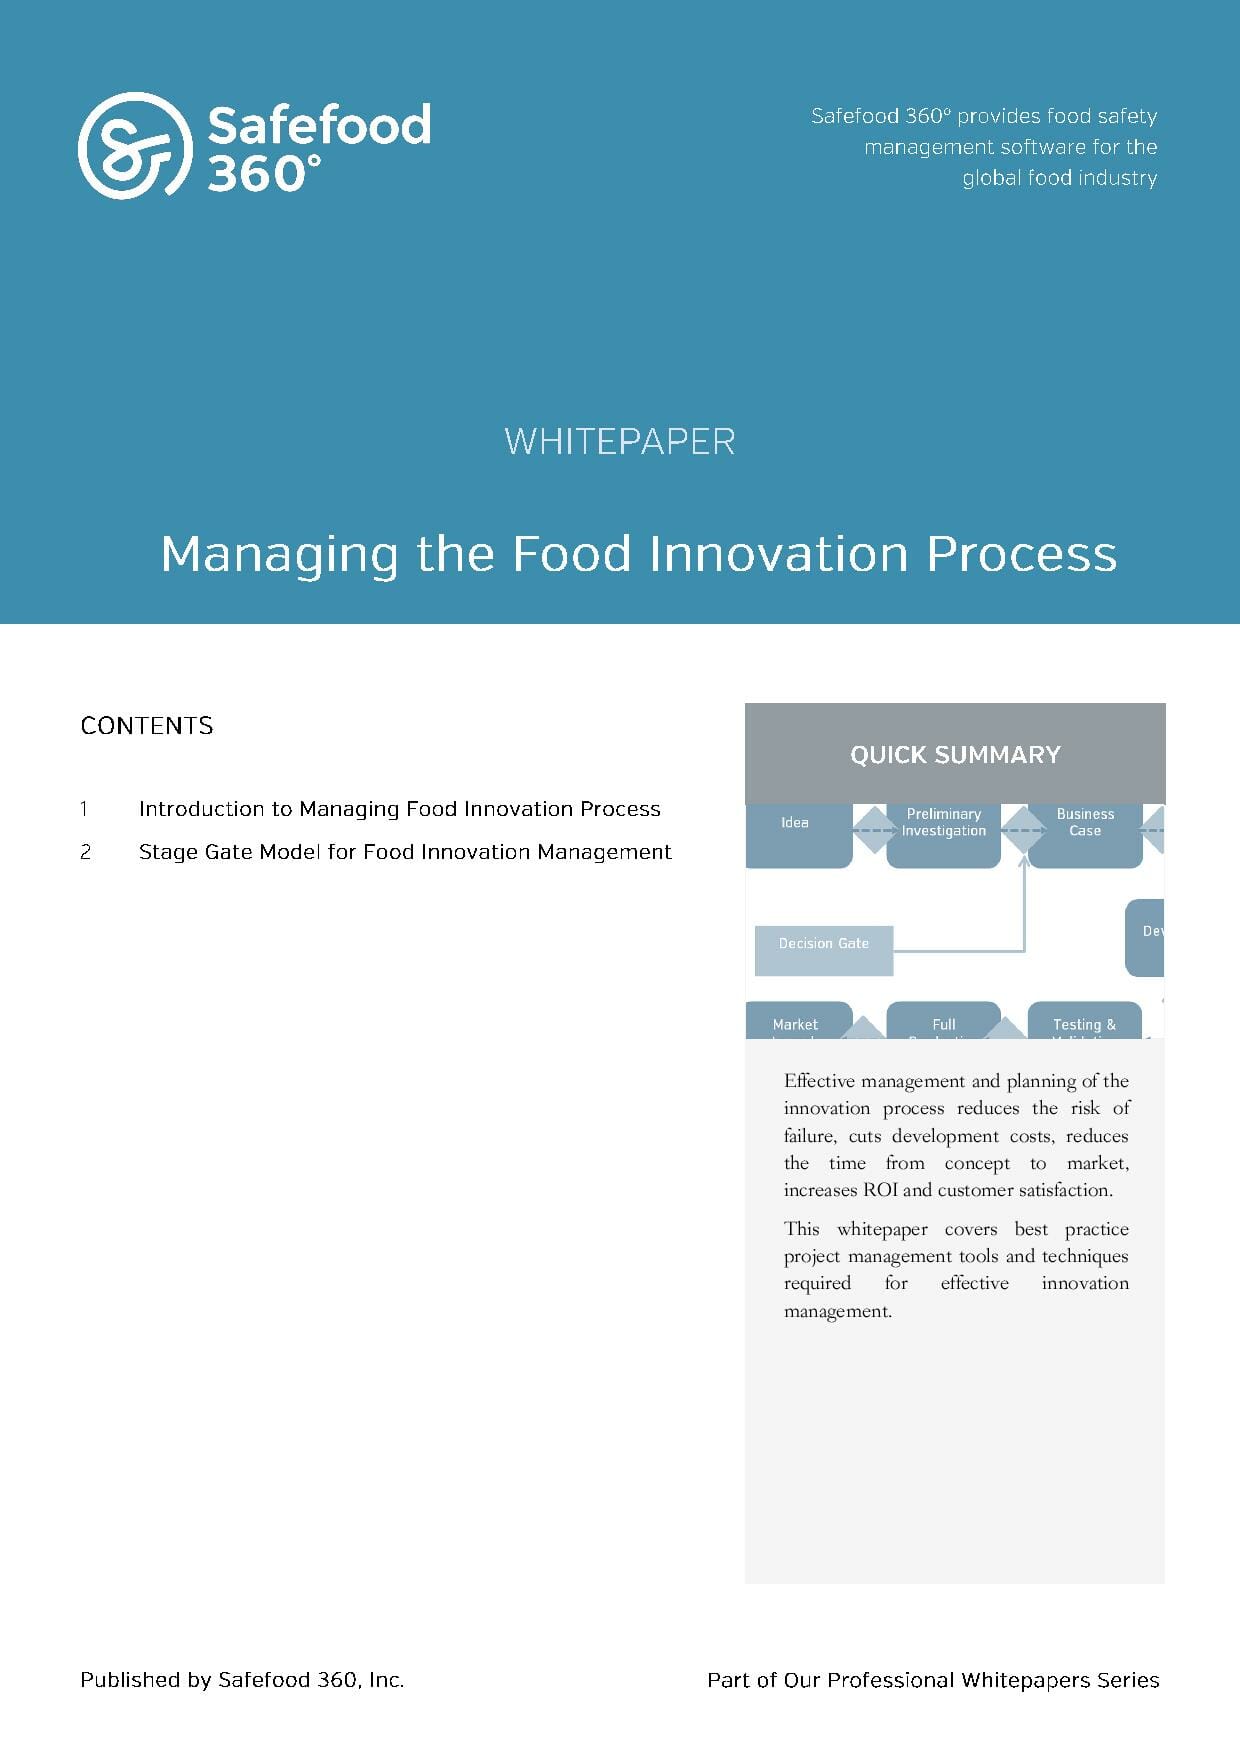 Managing the food innovation process